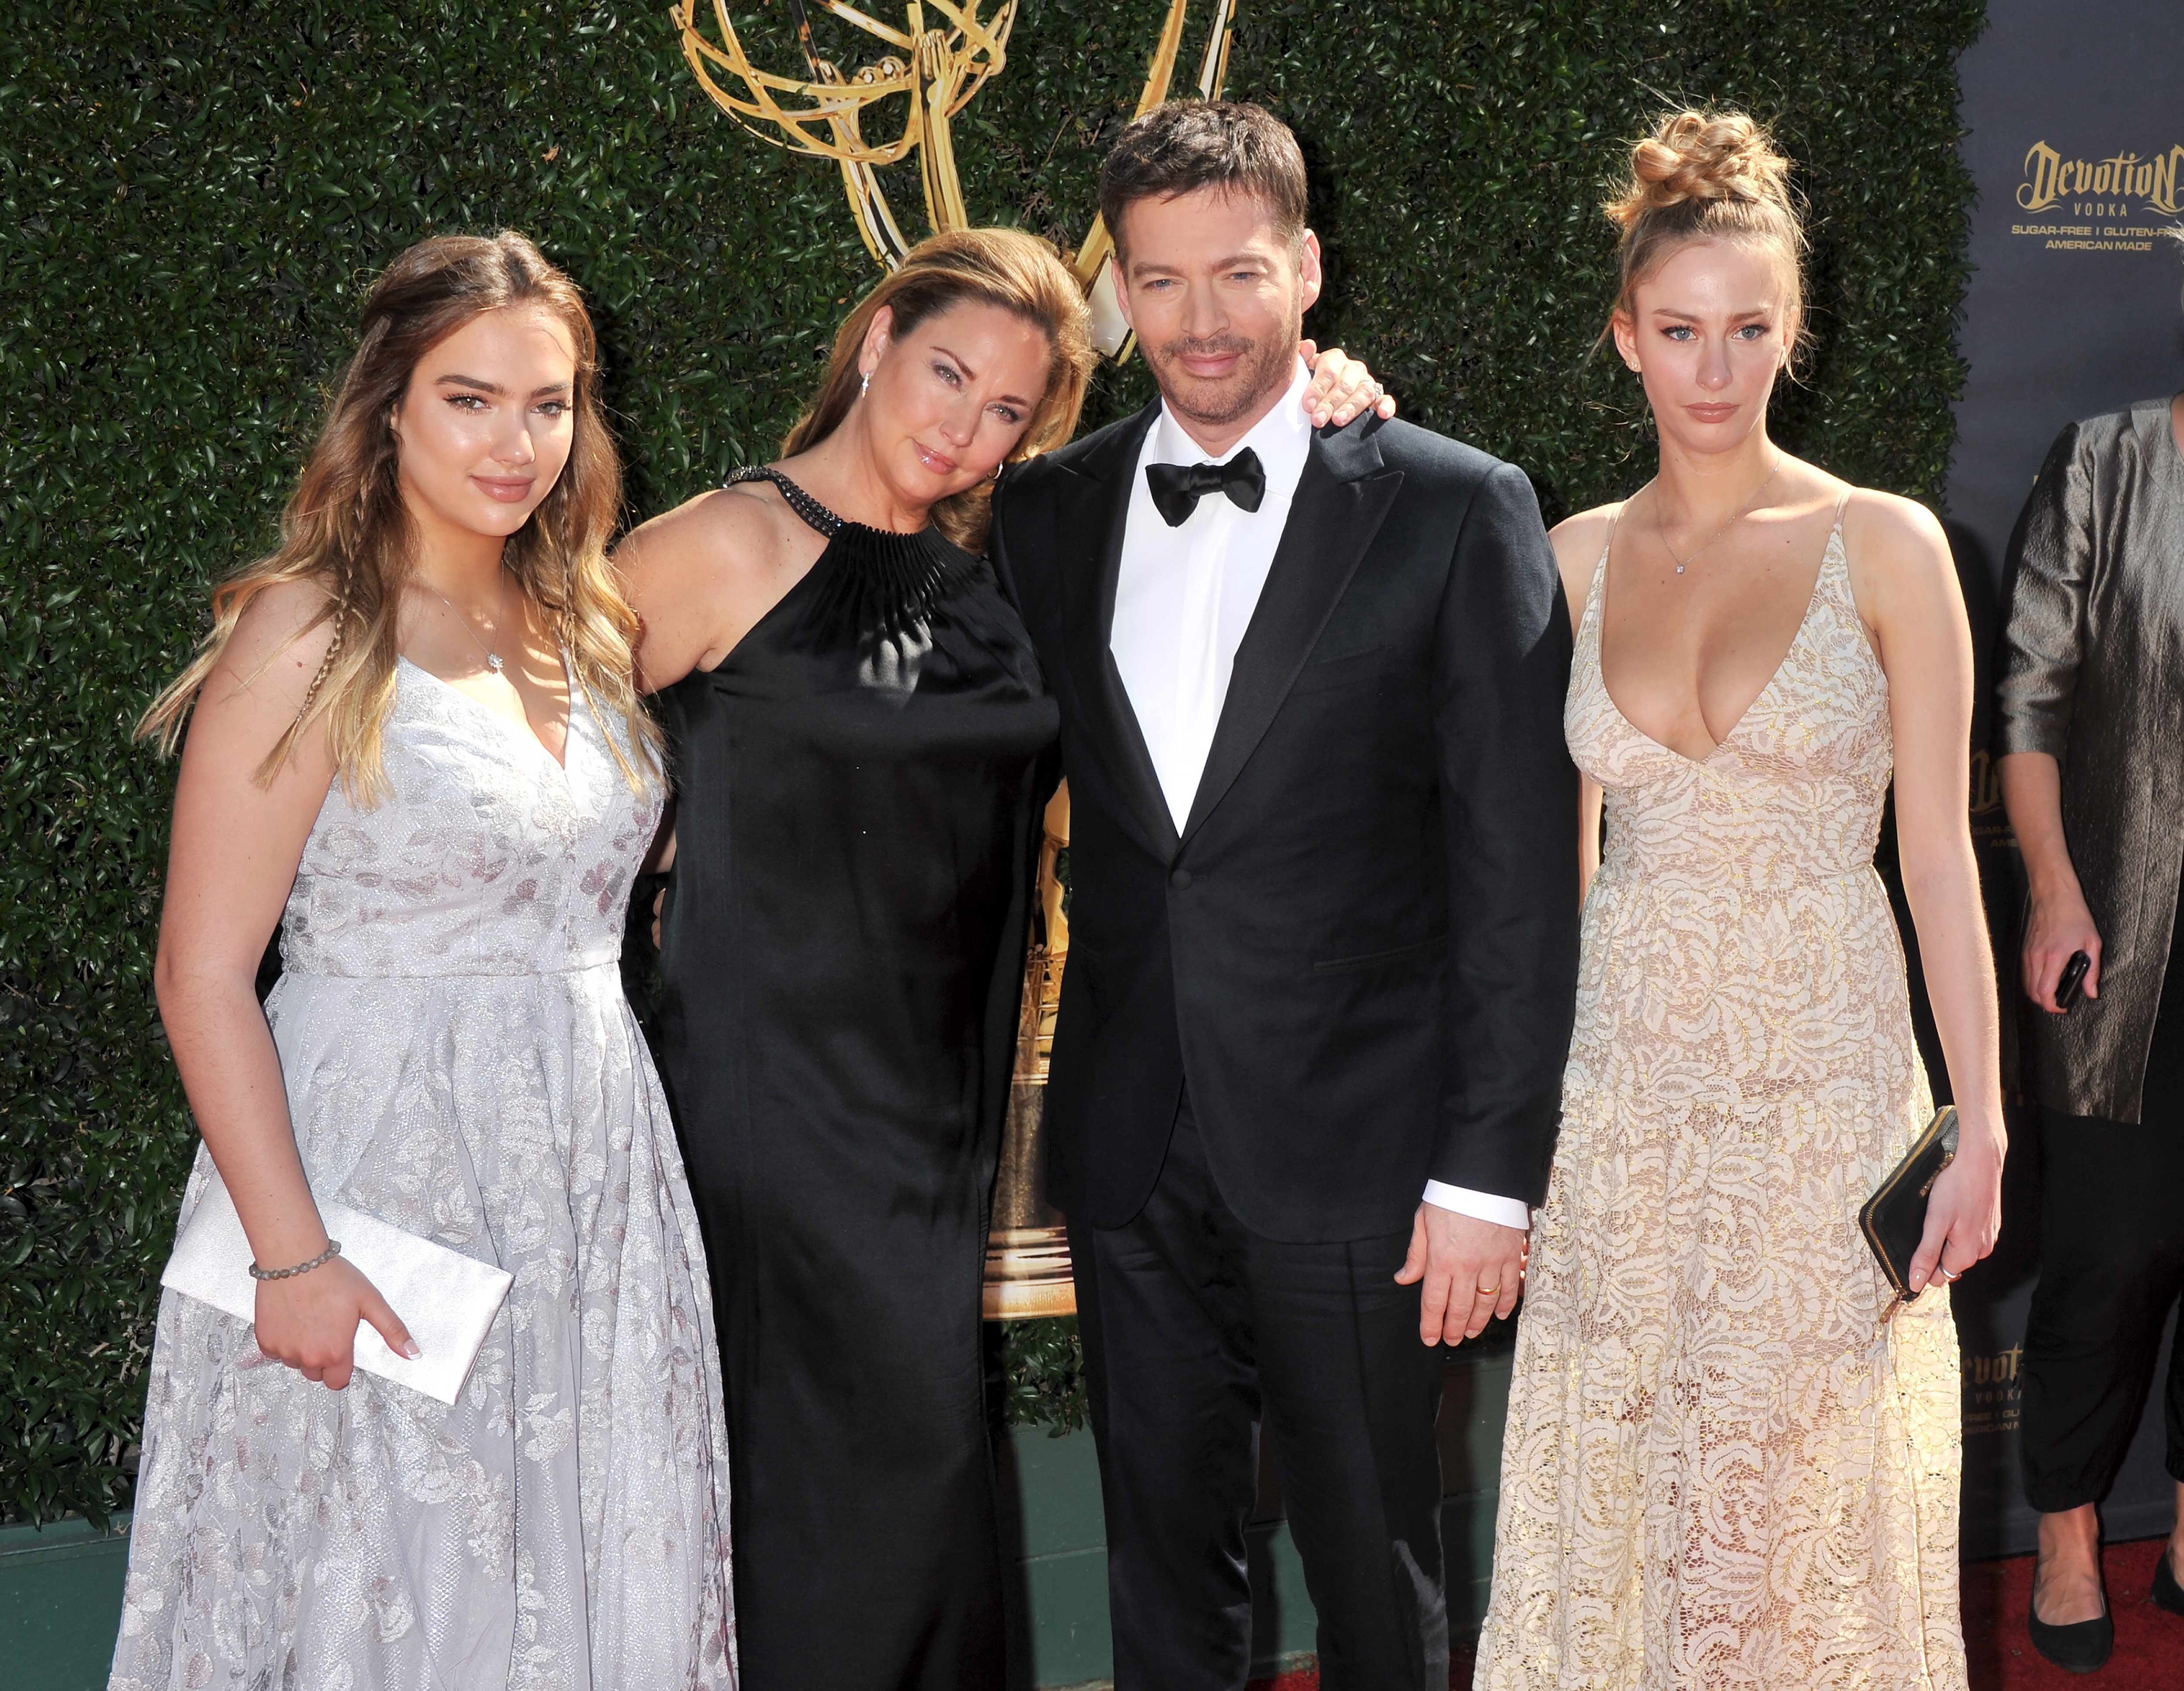 Harry Connick, Jr., wife Jill Goodacre and daughters arrive at the 44th Annual Daytime Emmy Awards at Pasadena Civic Auditorium | Photos :getty images